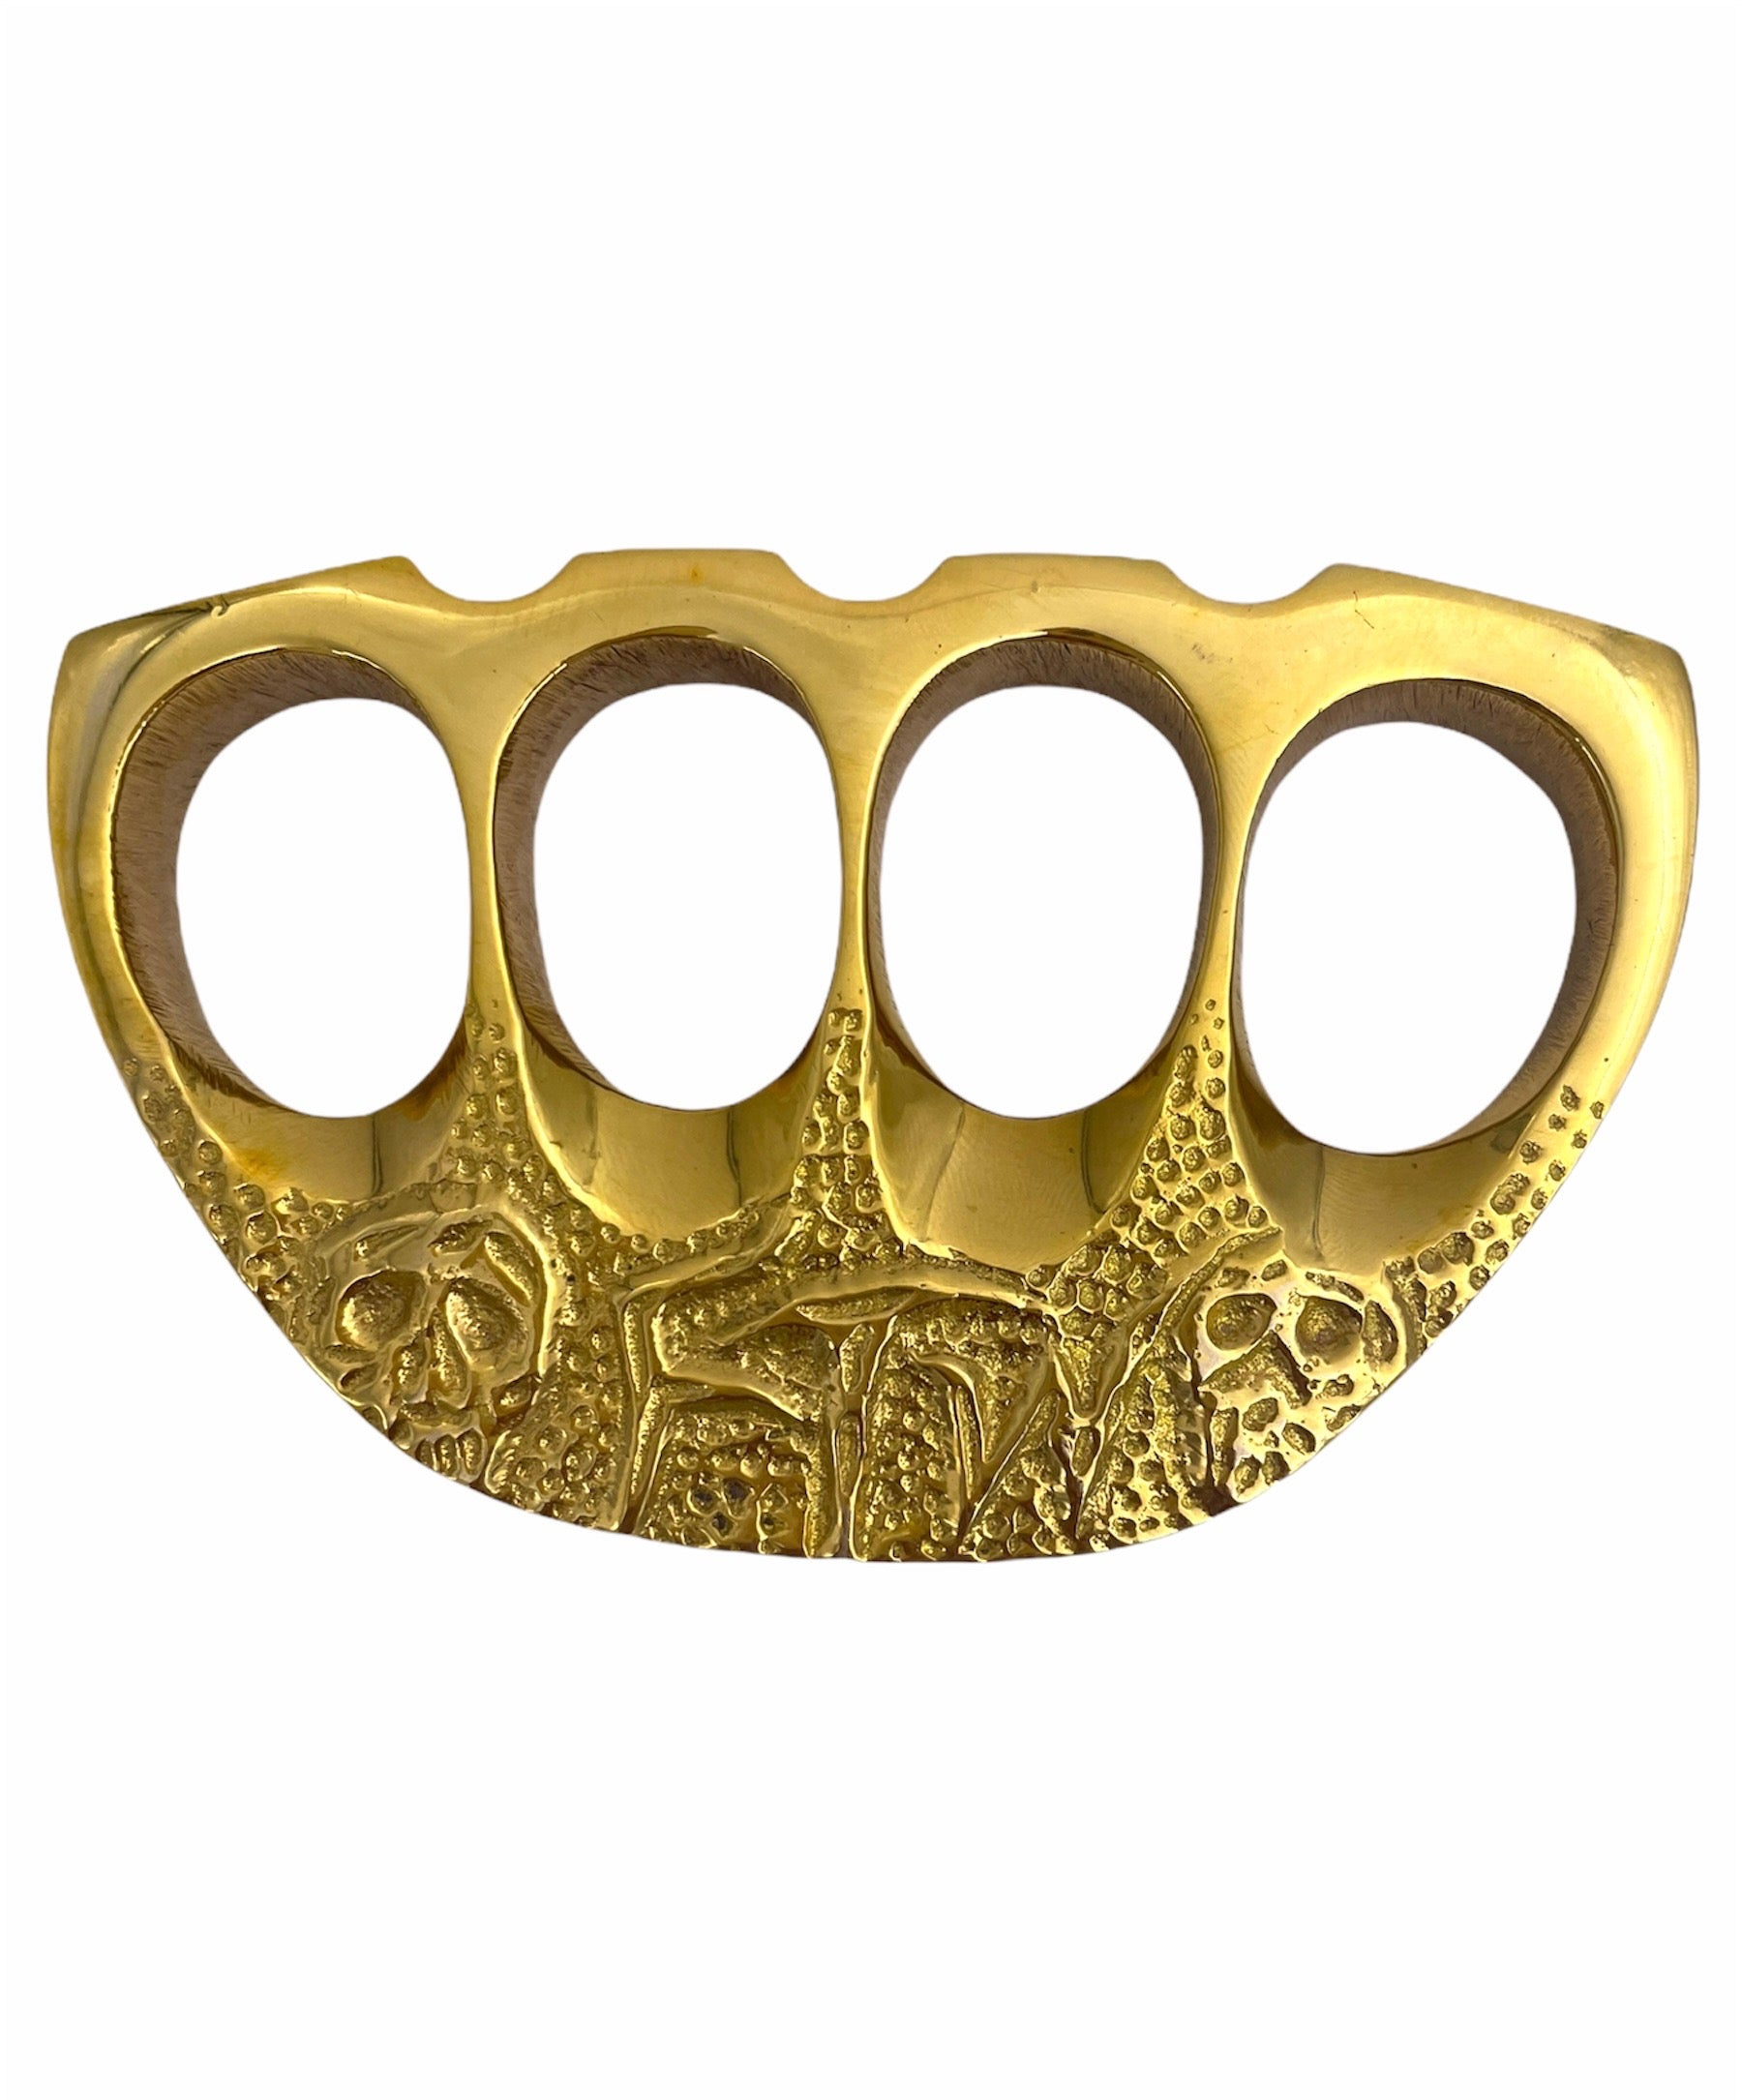 100% Pure Brass Knuckles